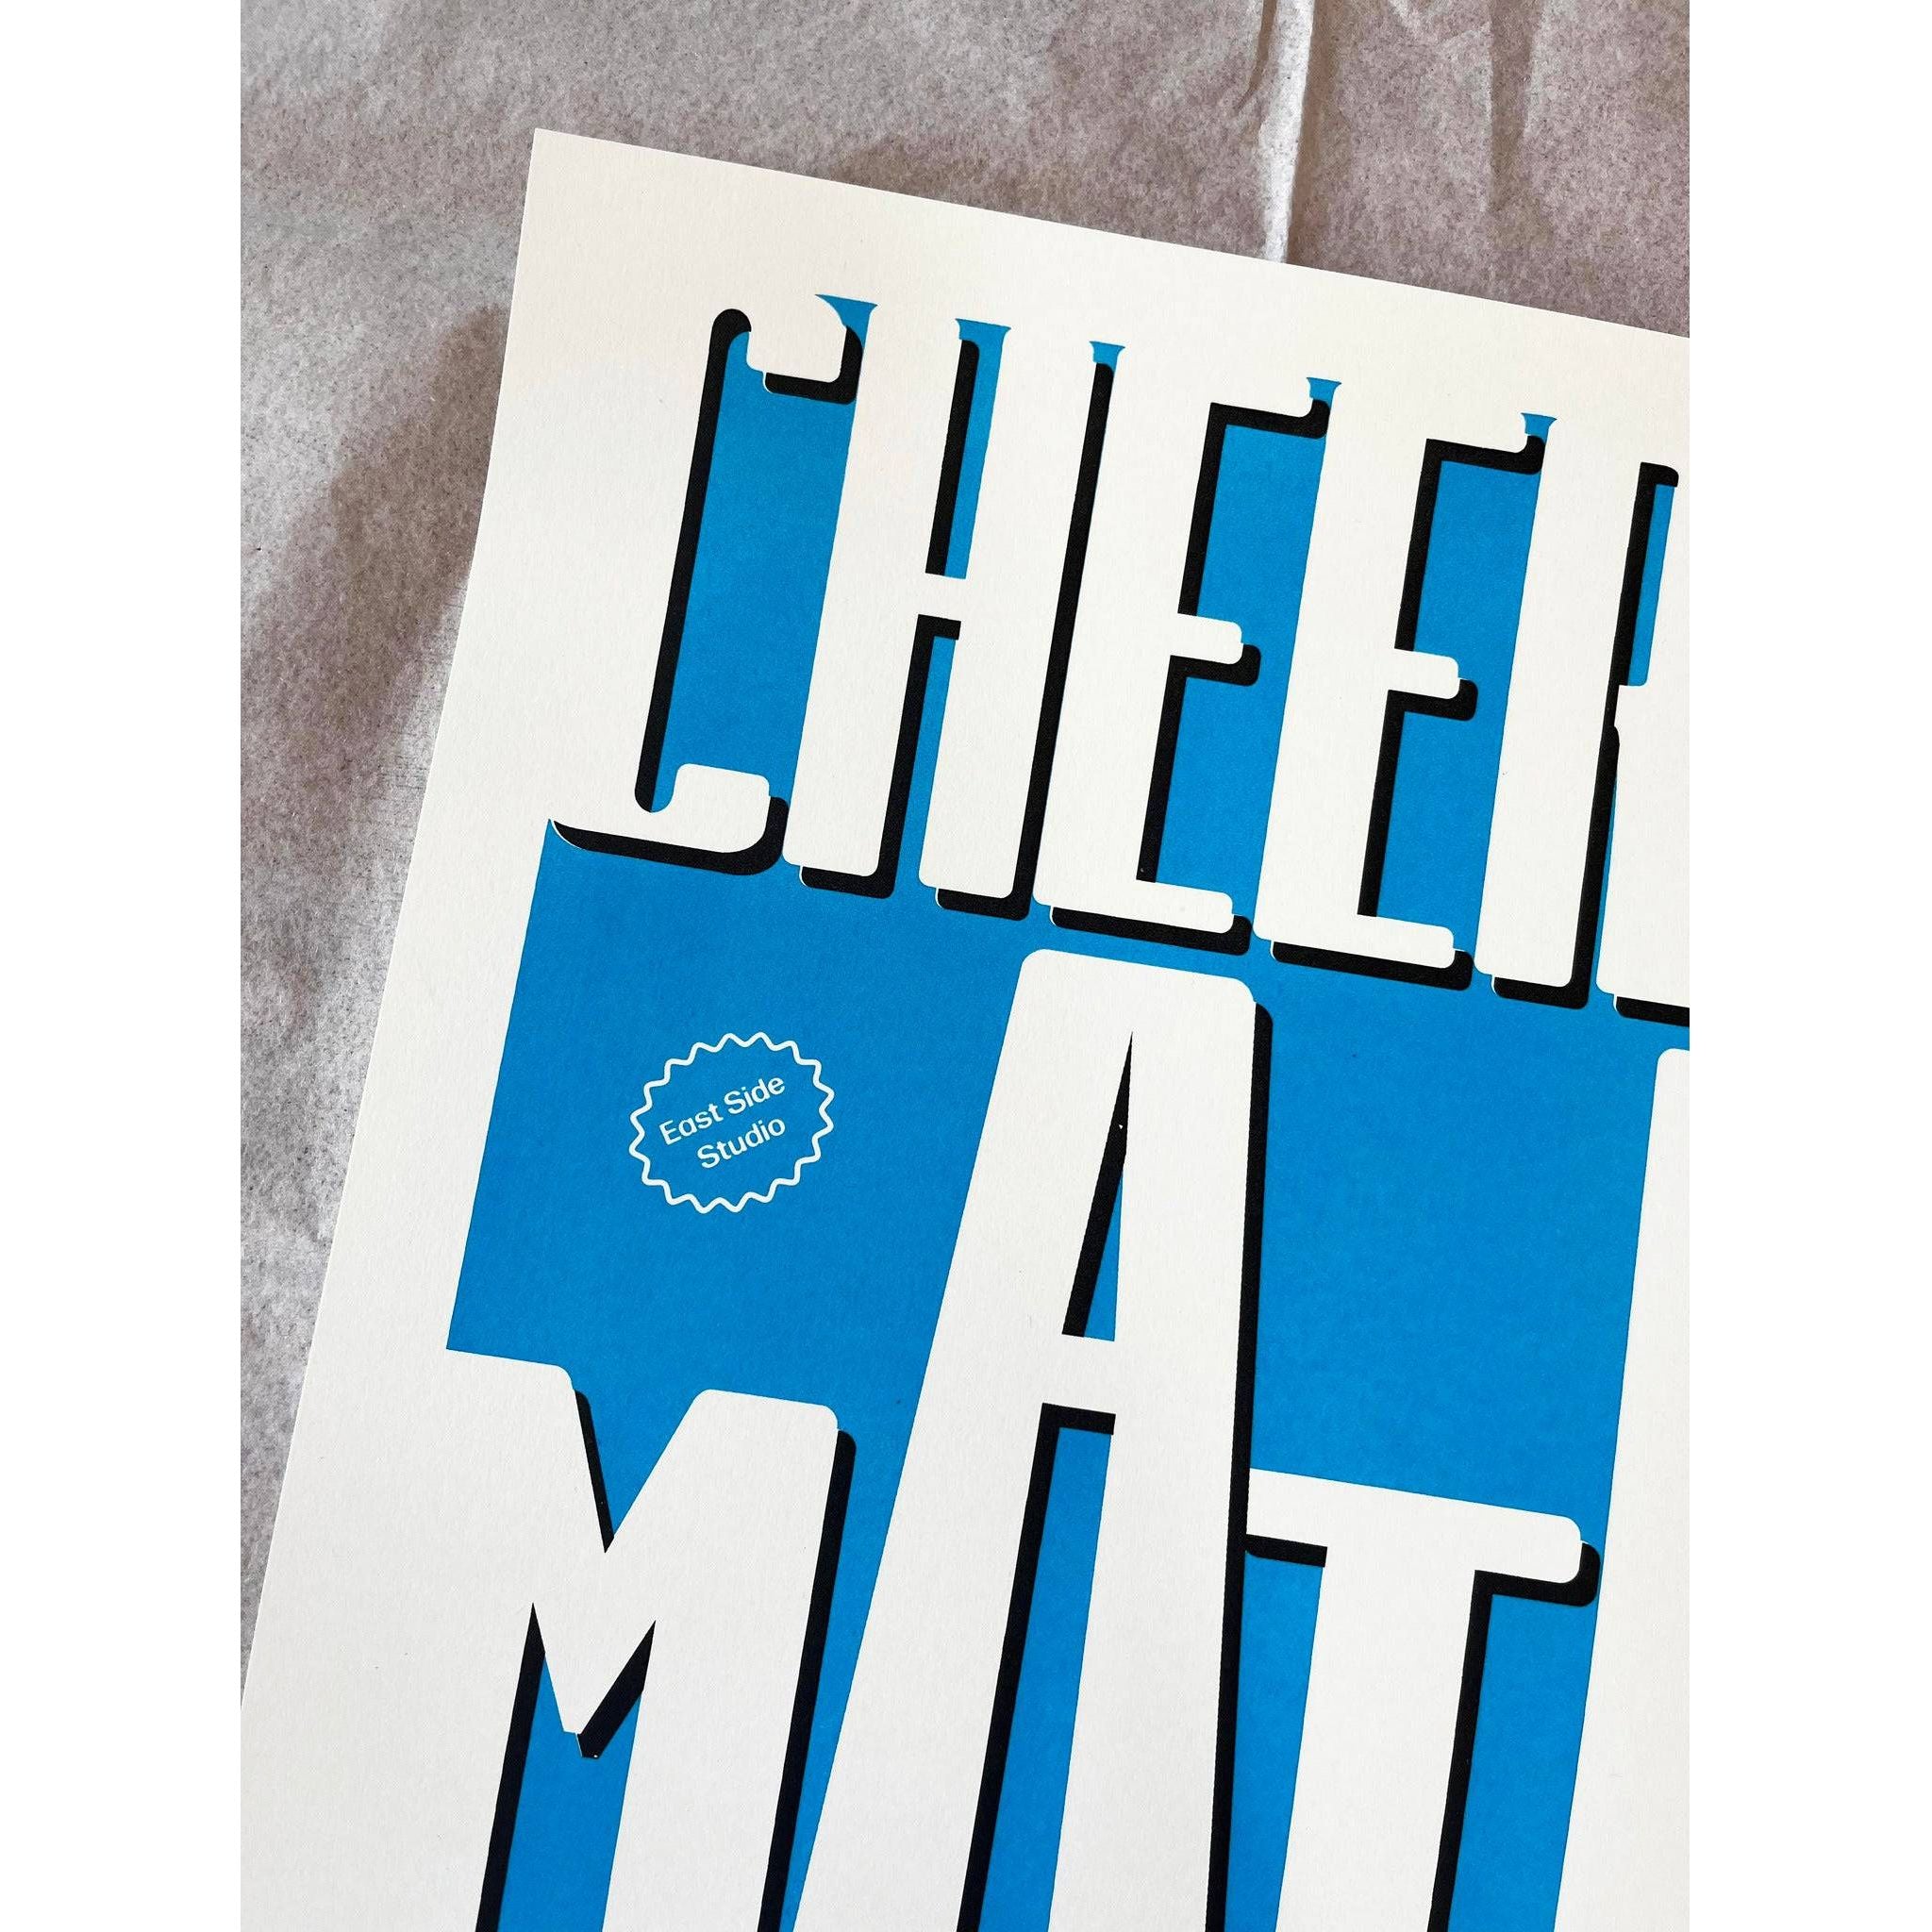 Cheers Mate - Limited Edition